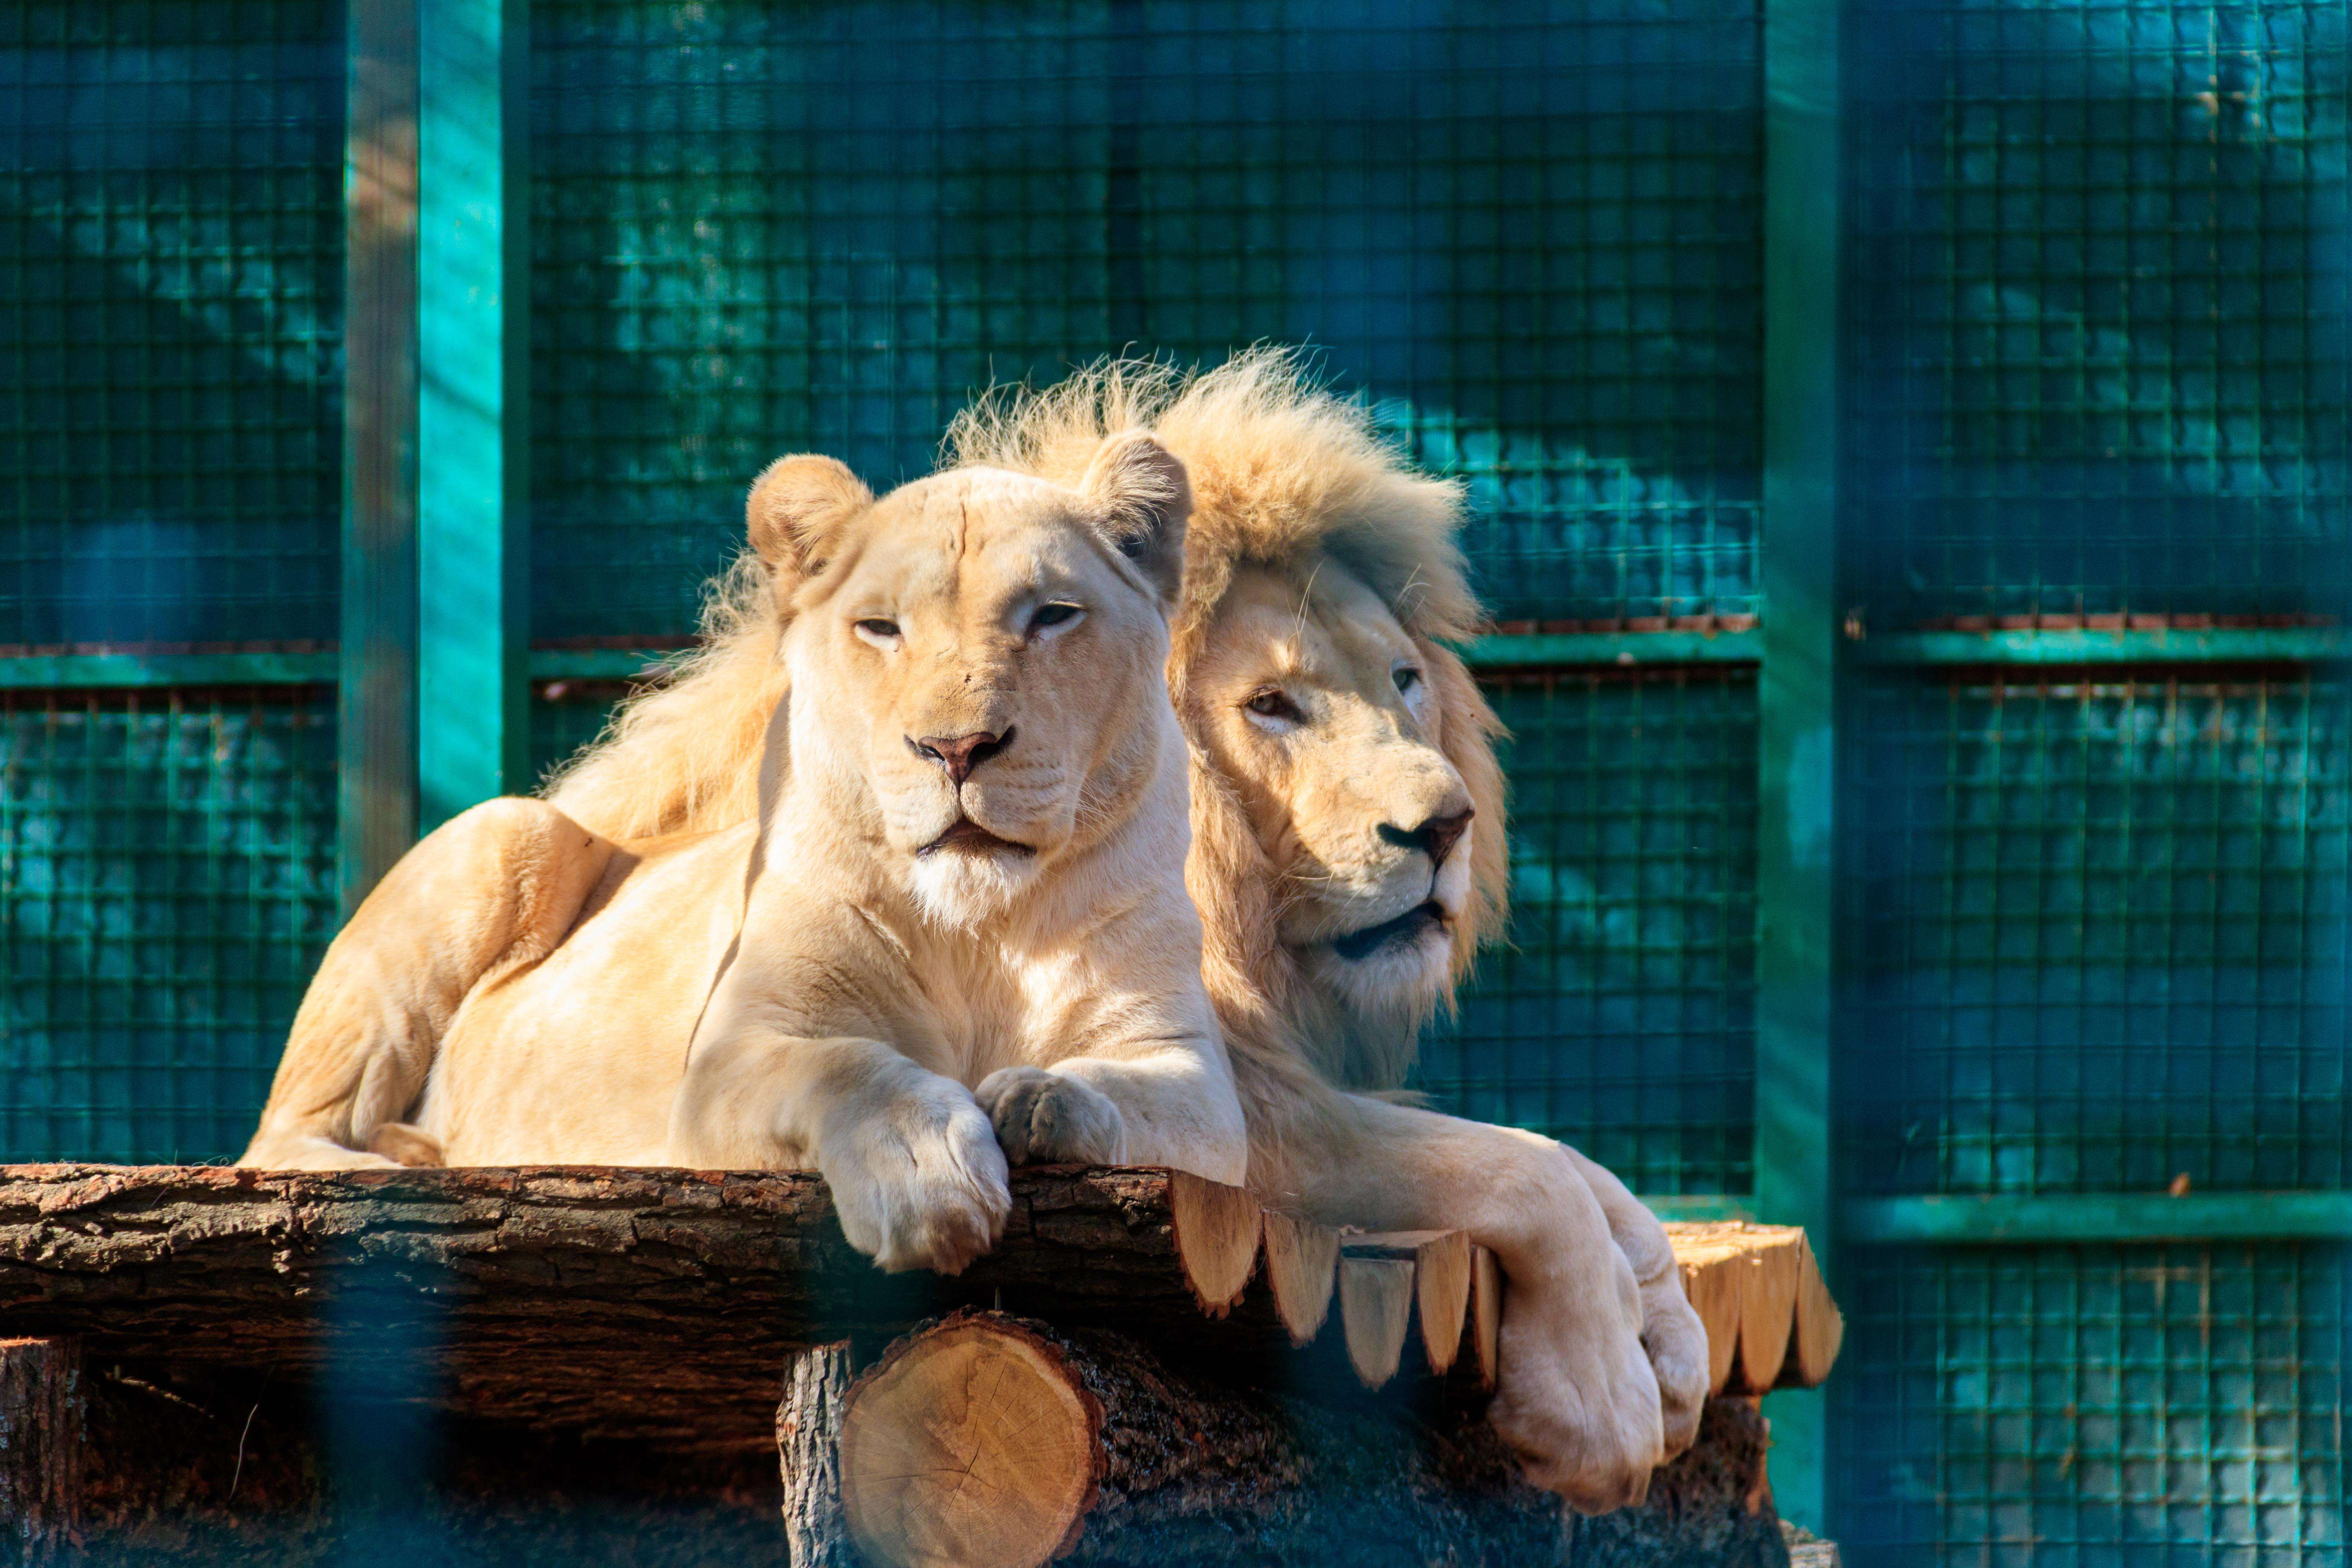 2 lions in zoo